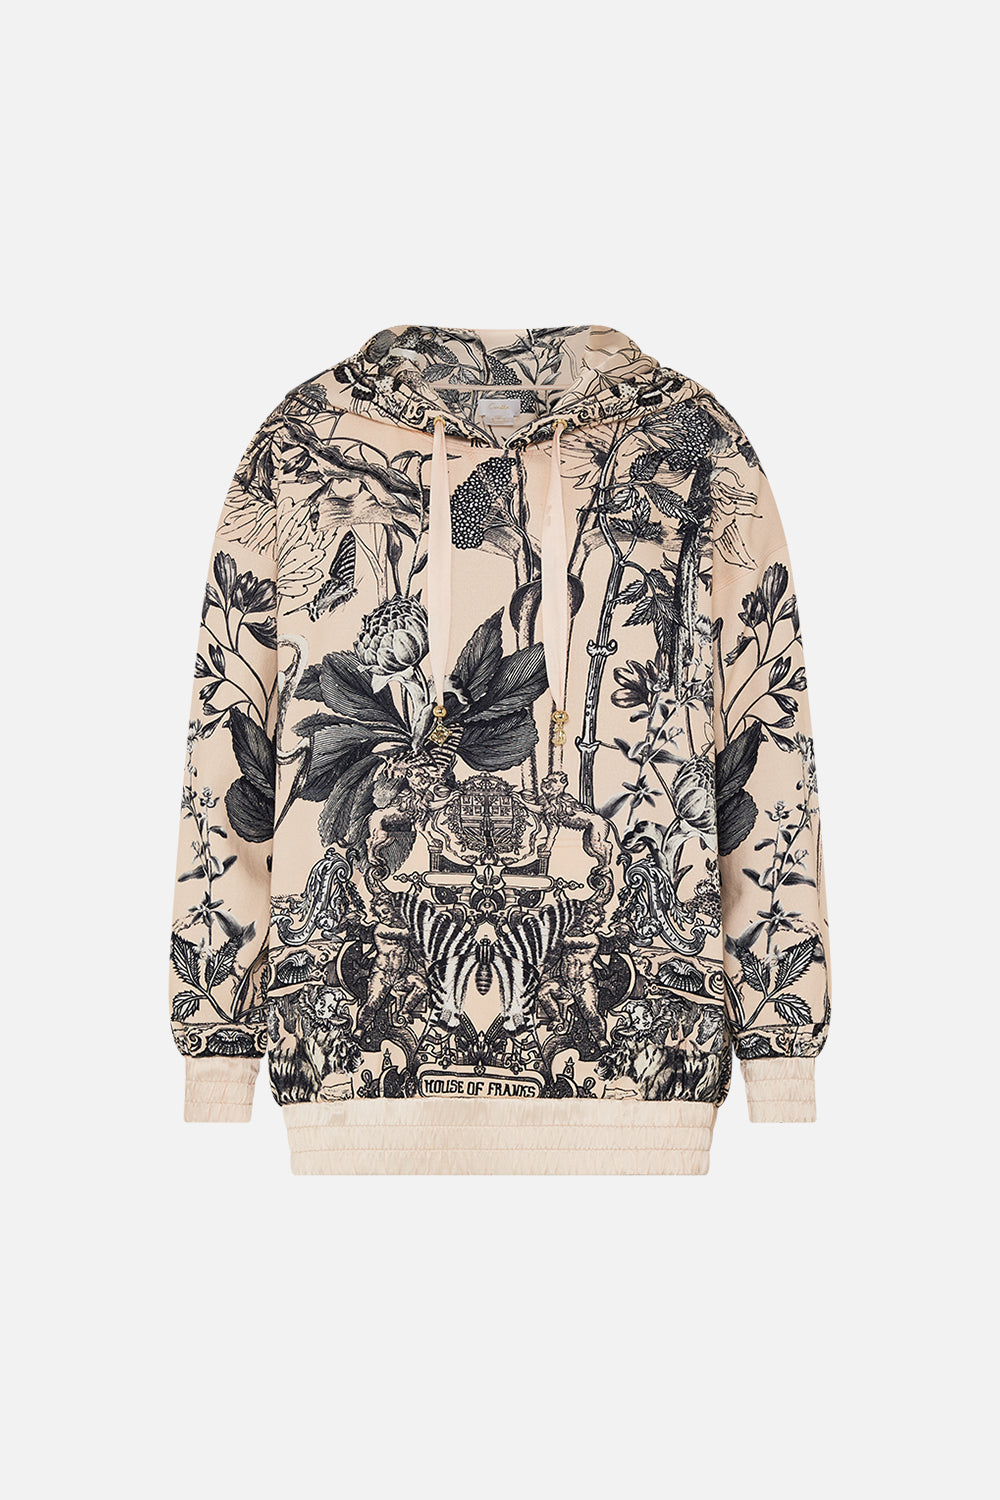 CAMILLA oversized hoodie in Etched Into Eternity print